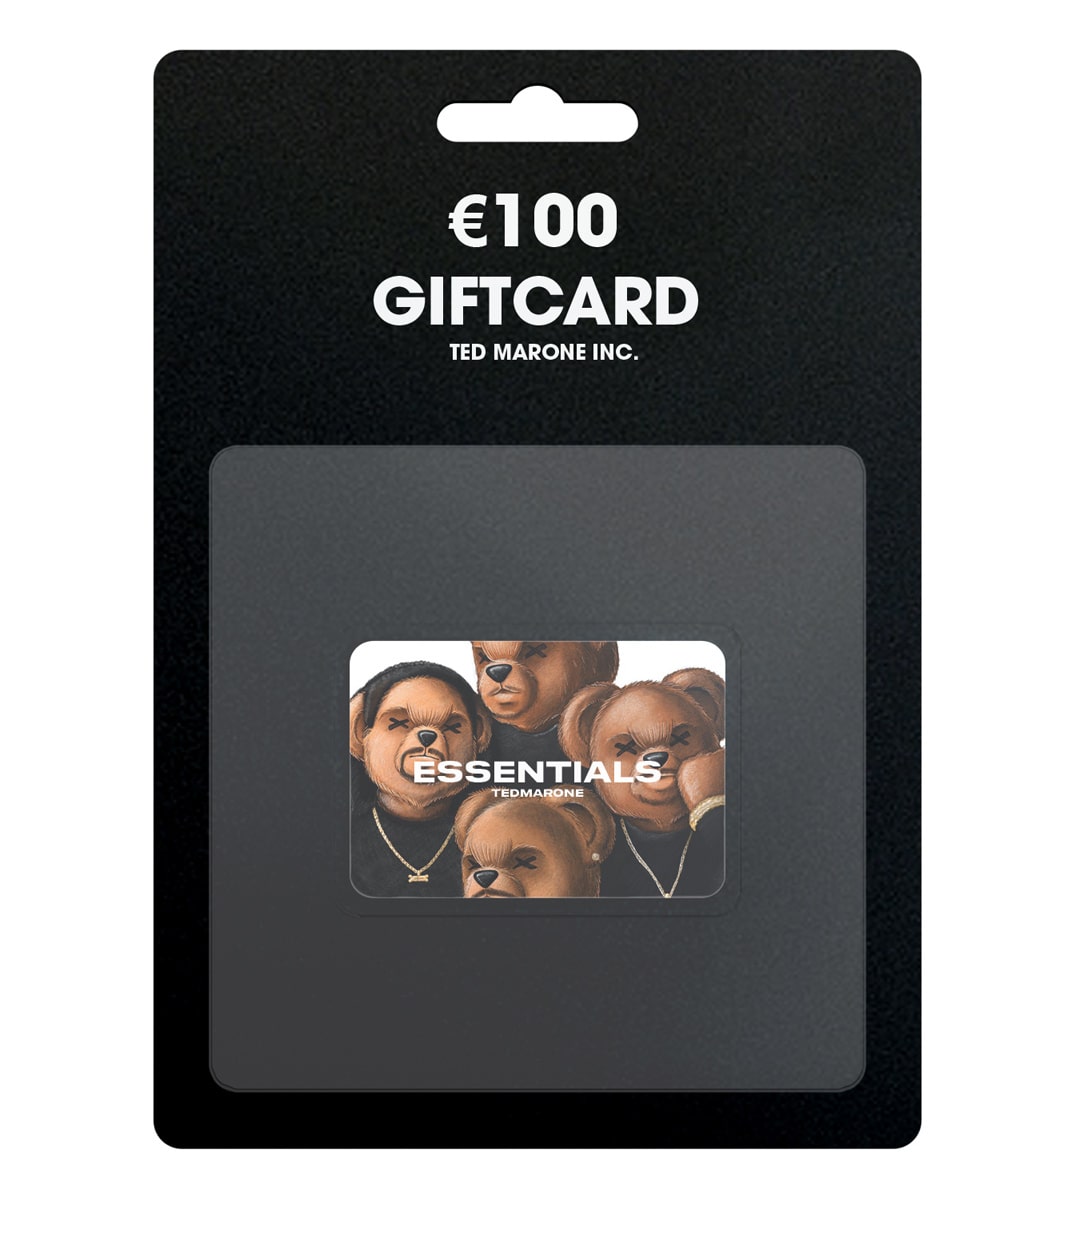 €500,- GIFTCARD